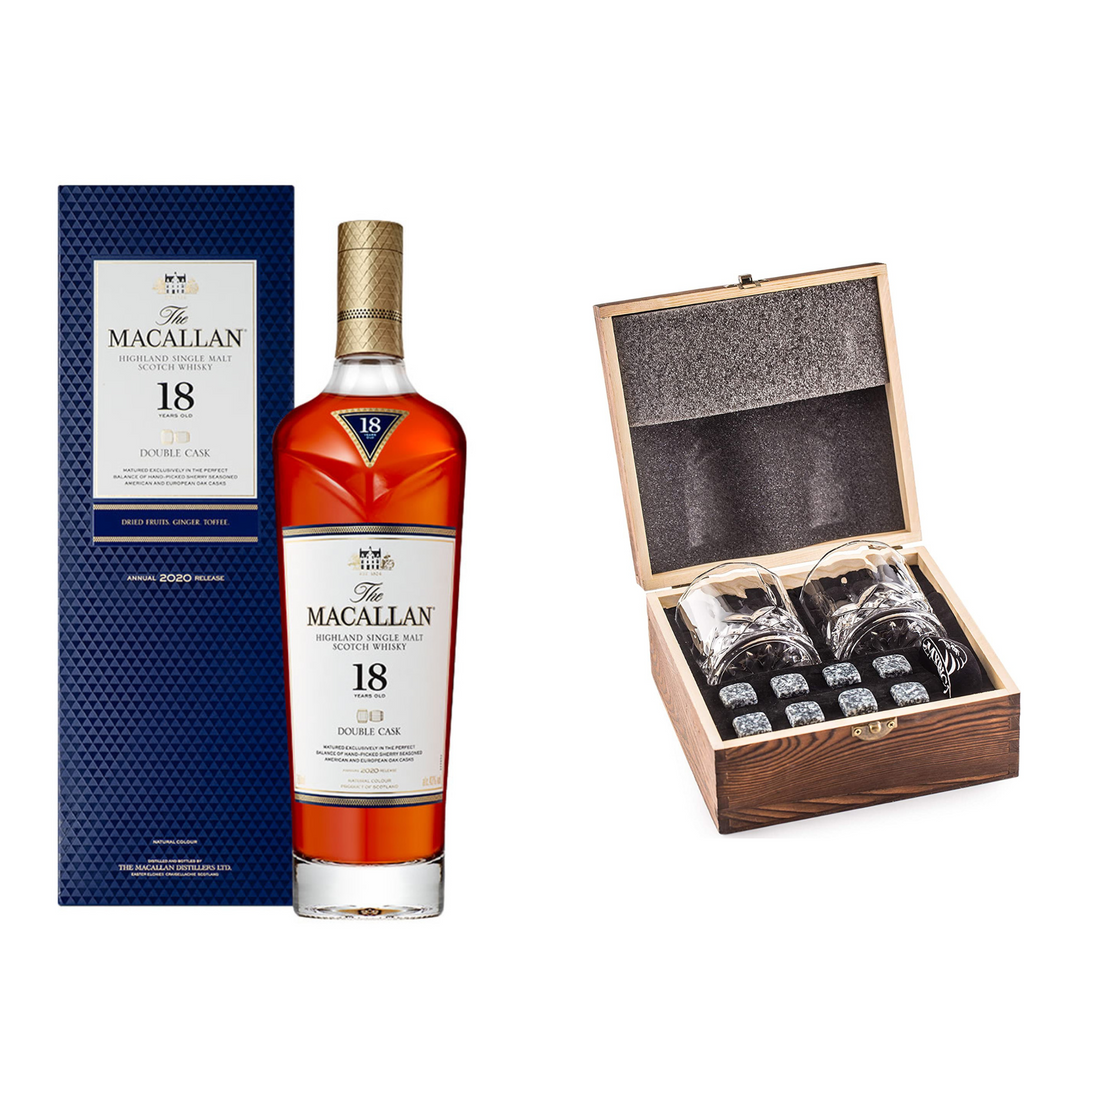 Discover The Perfect Present with Liquor Geeks' Gift Sets - Liquor Geeks